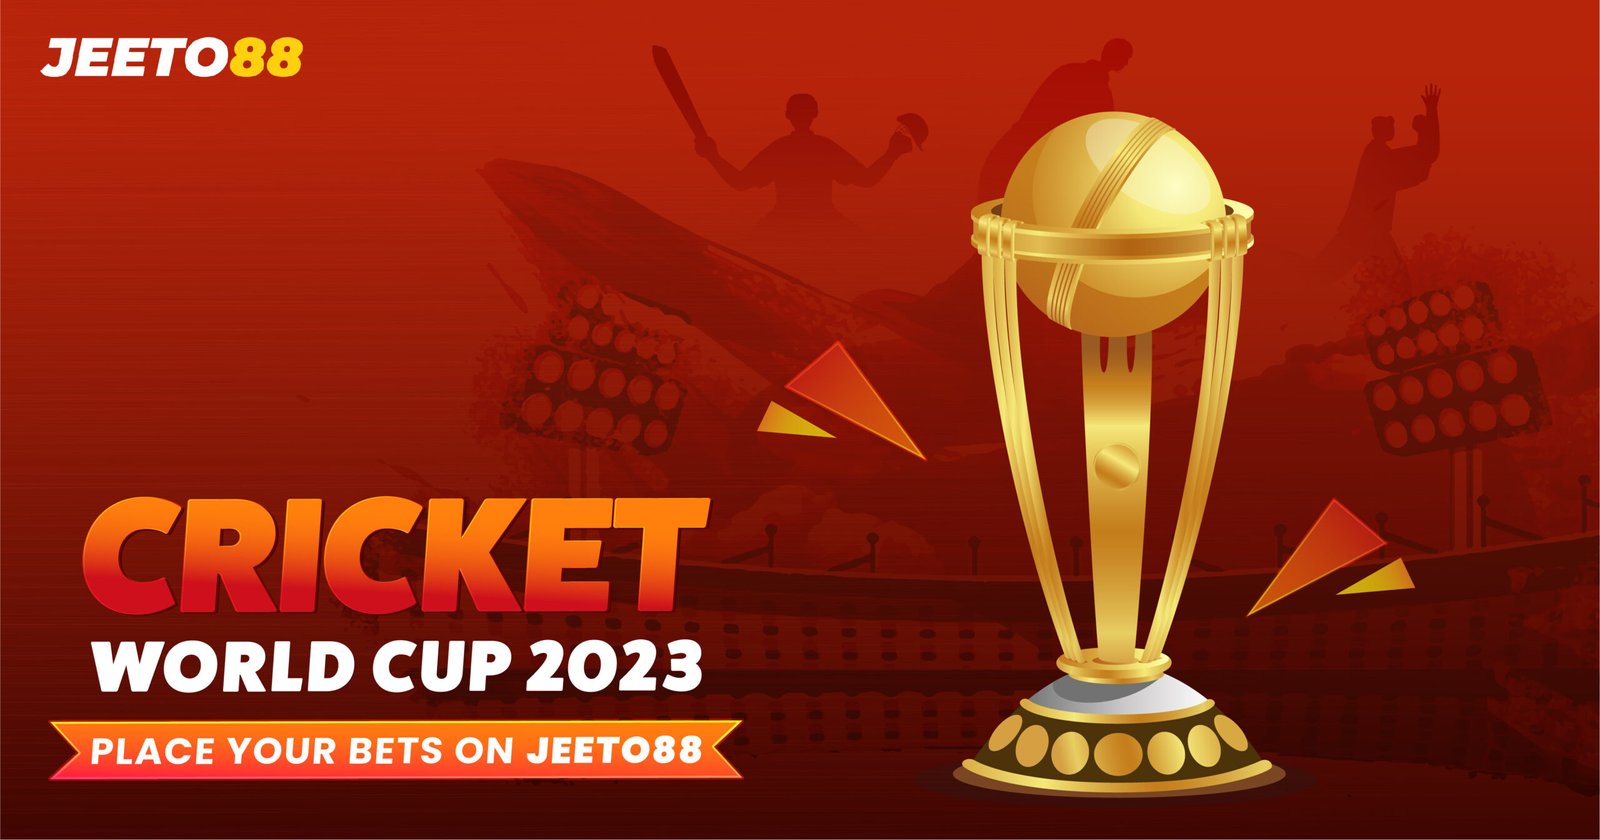 Cricket World Cup on jeeto88